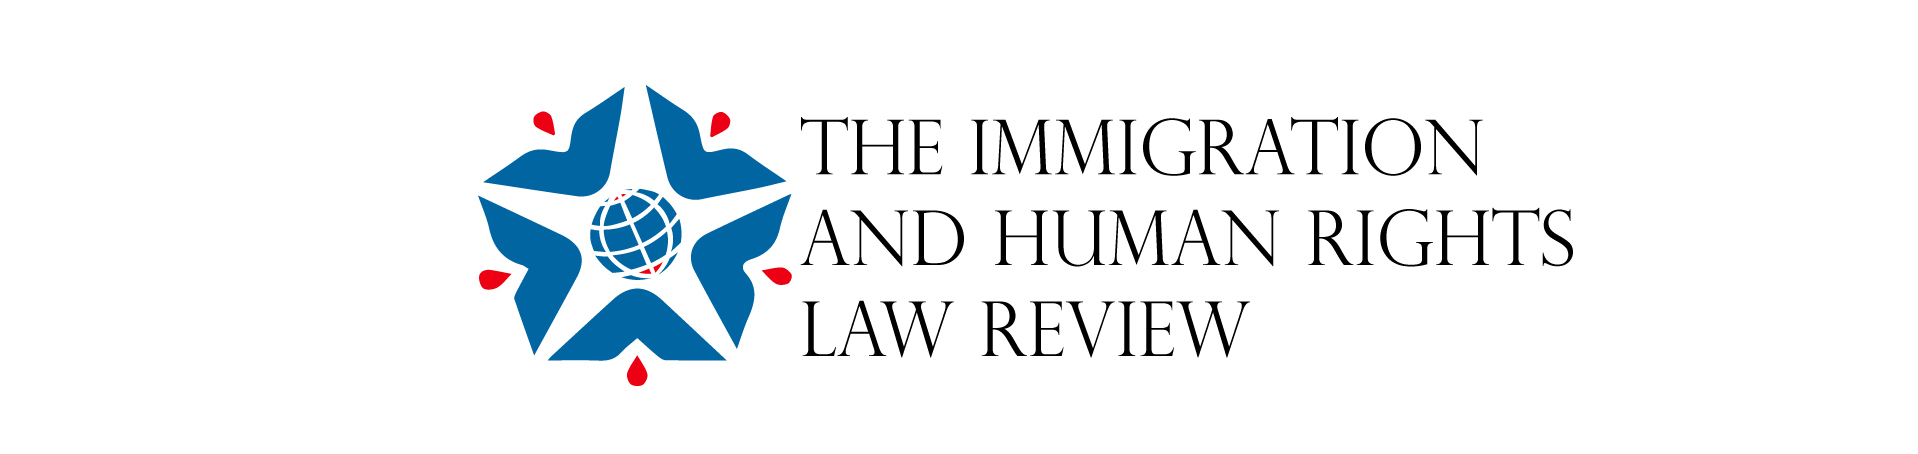 Immigration and Human Rights Law Review